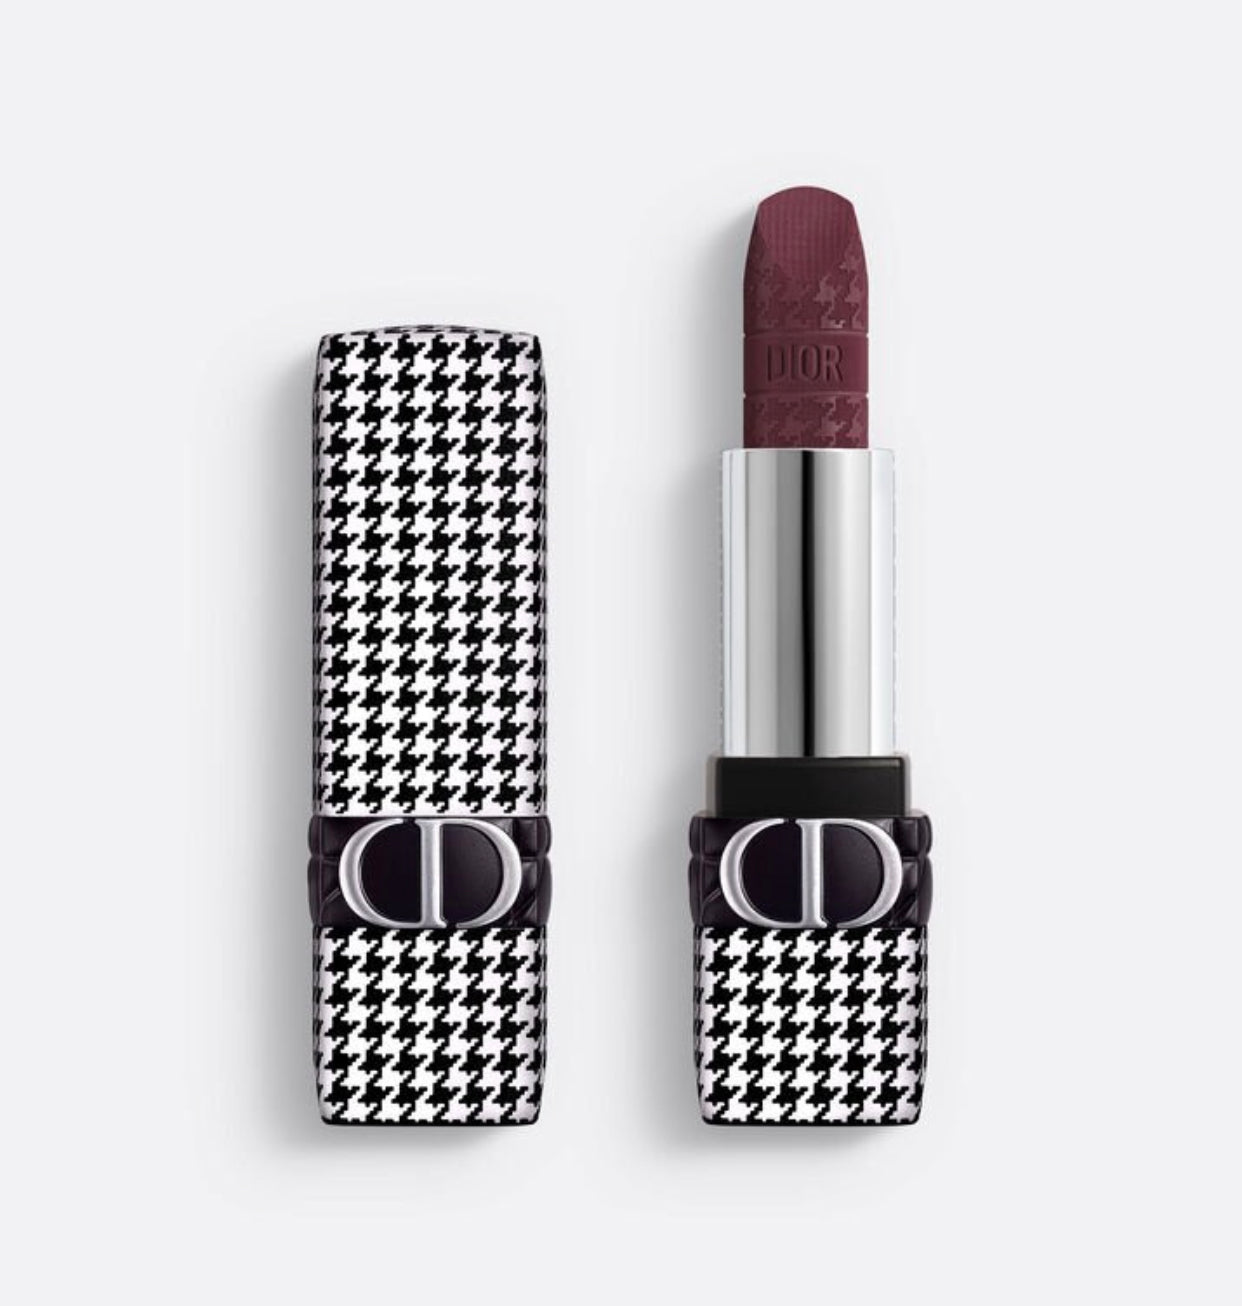 DIOR, ROUGE NEW LOOK LIMITED EDITION